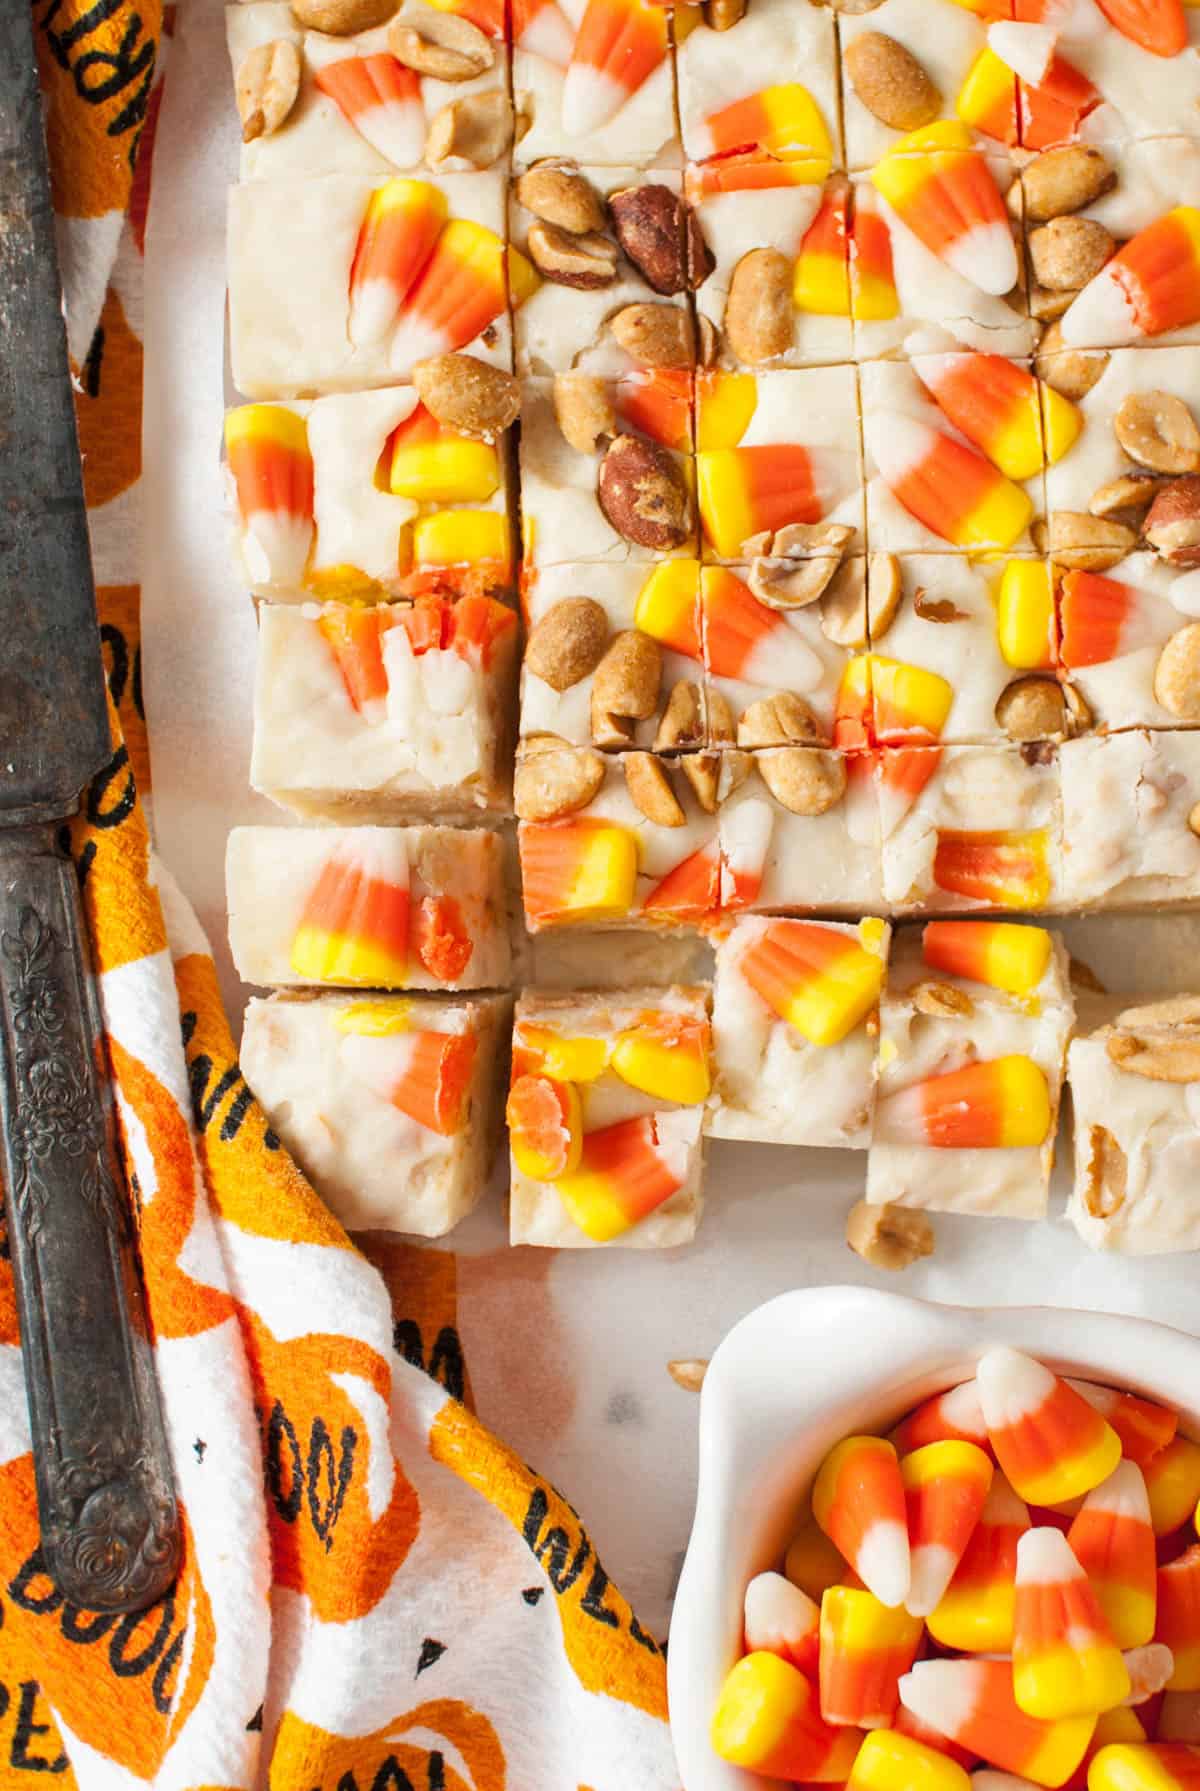 Small squares of Halloween candy corn fudge with peanuts in rows next to a bowl of candy corn.